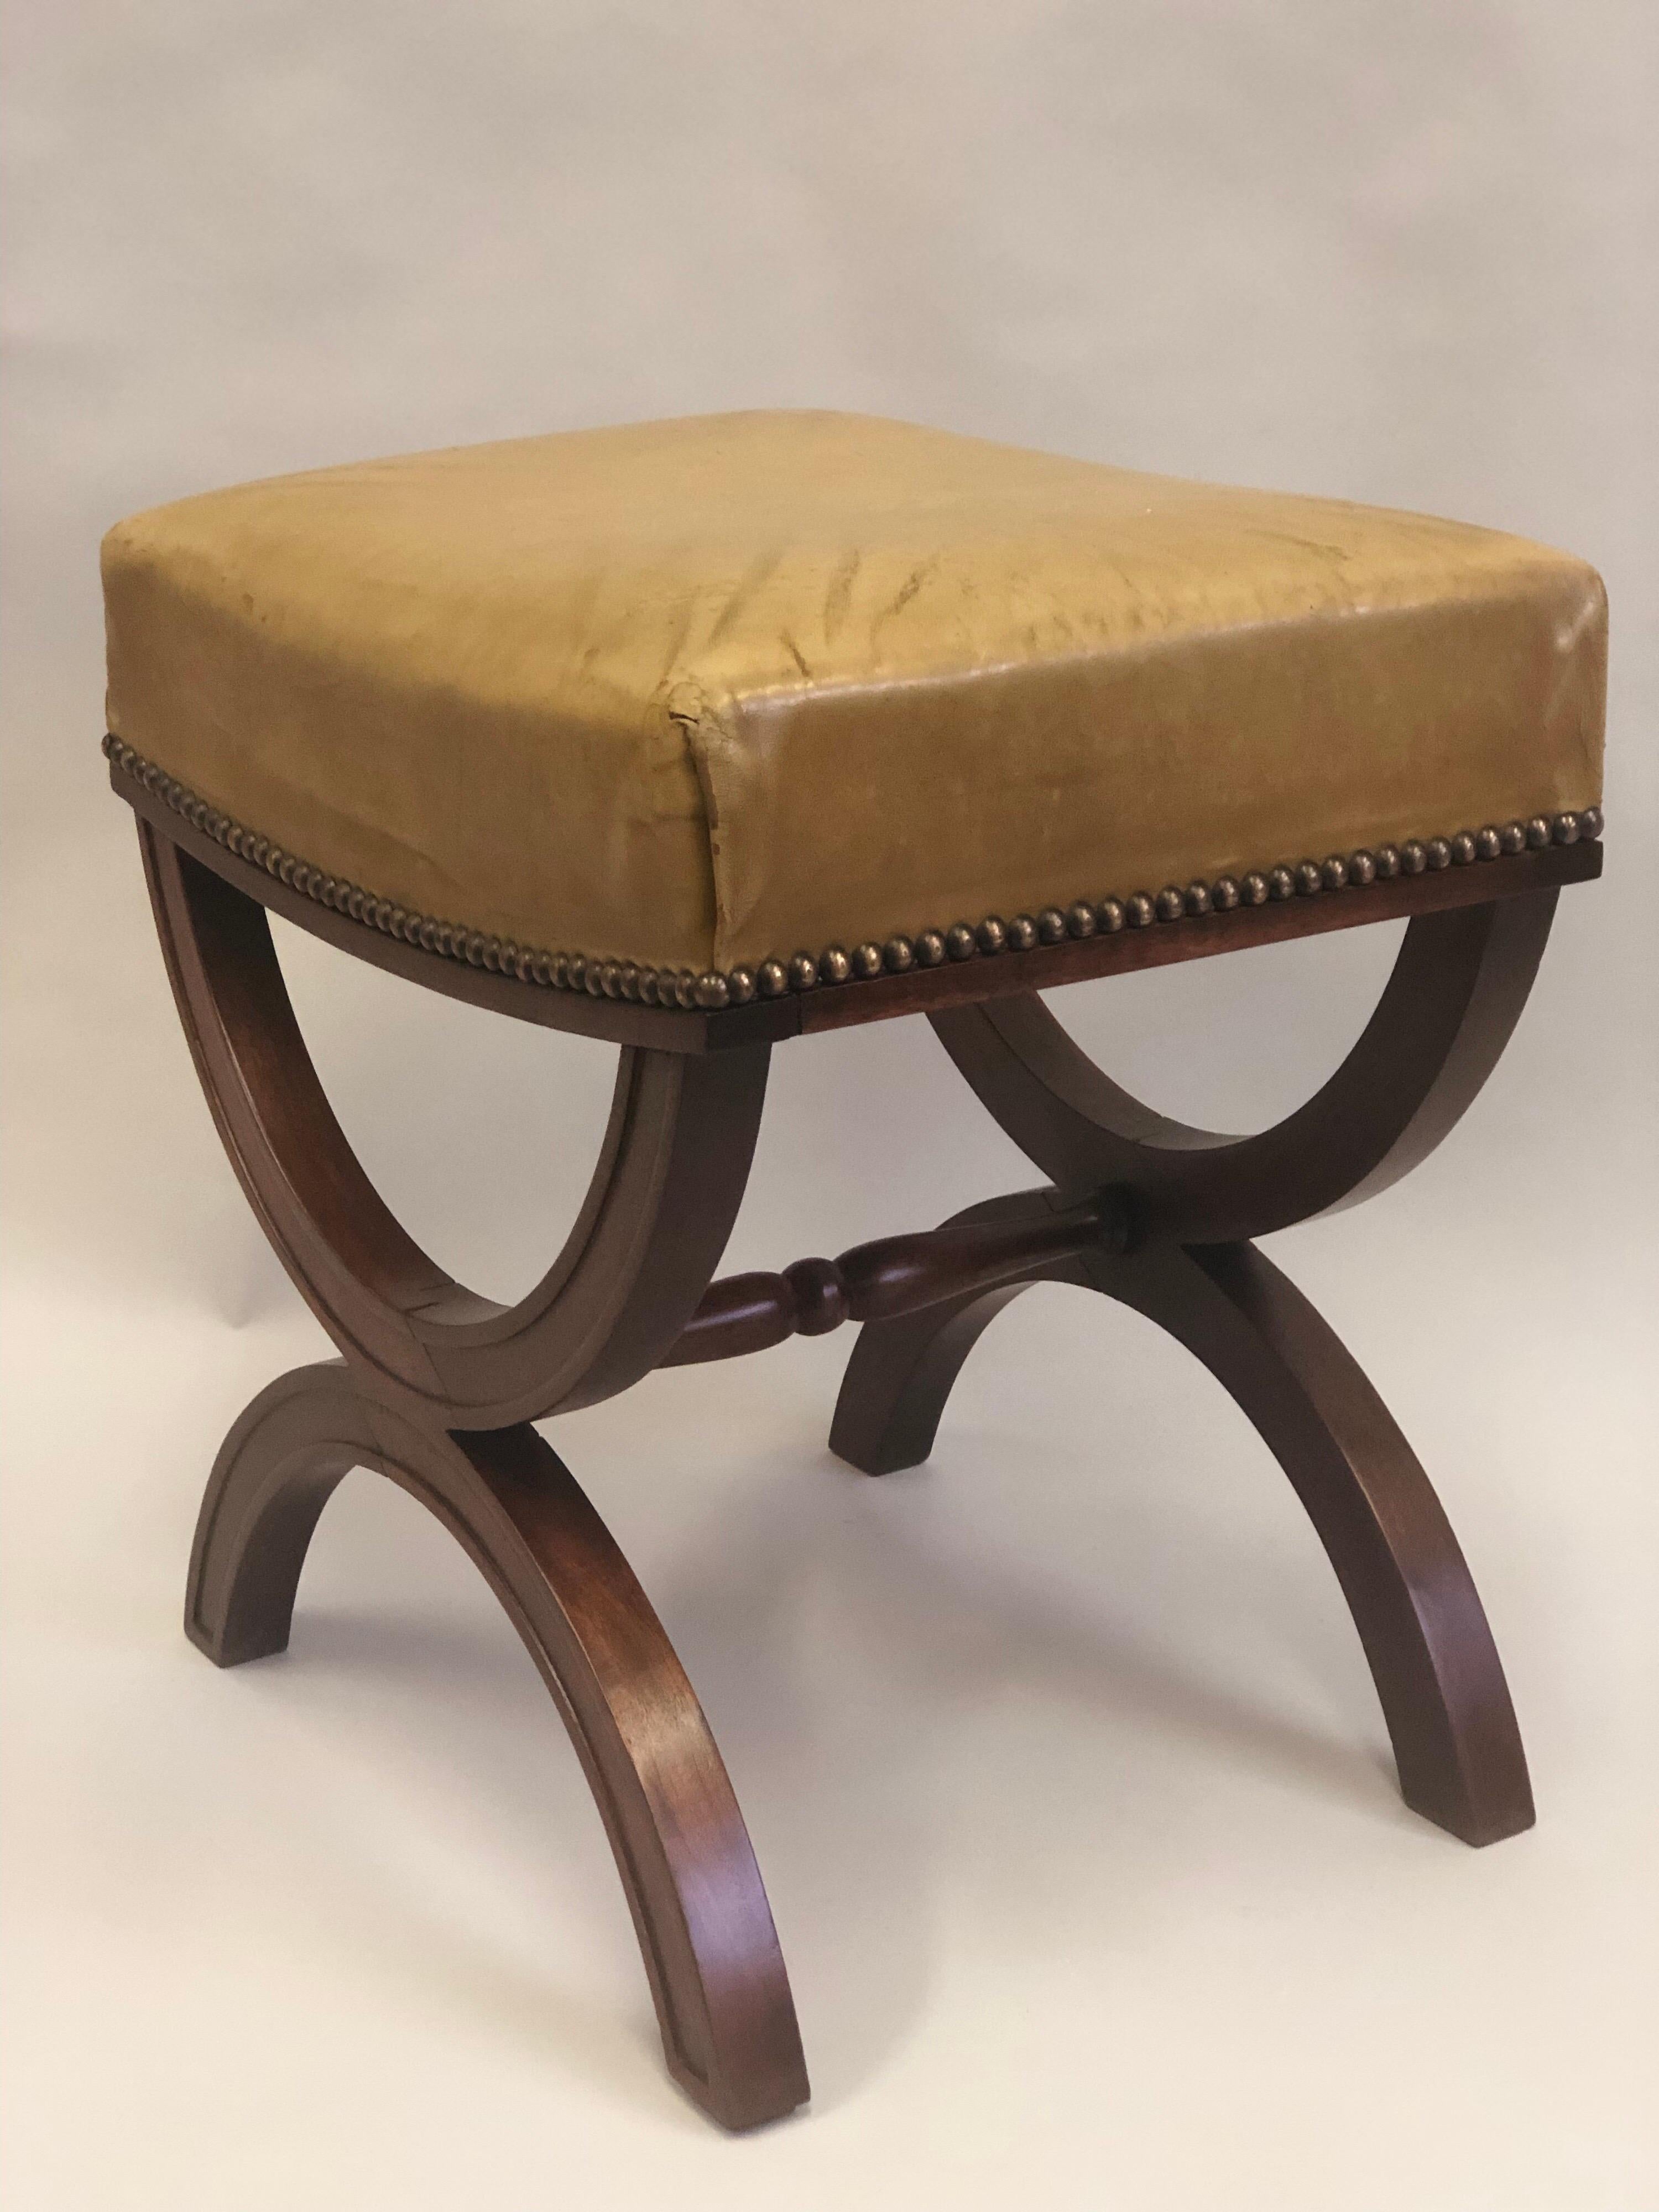 French Modern Neoclassical Mahogany & Leather Benches/ Stools, Andre Arbus, Pair For Sale 3